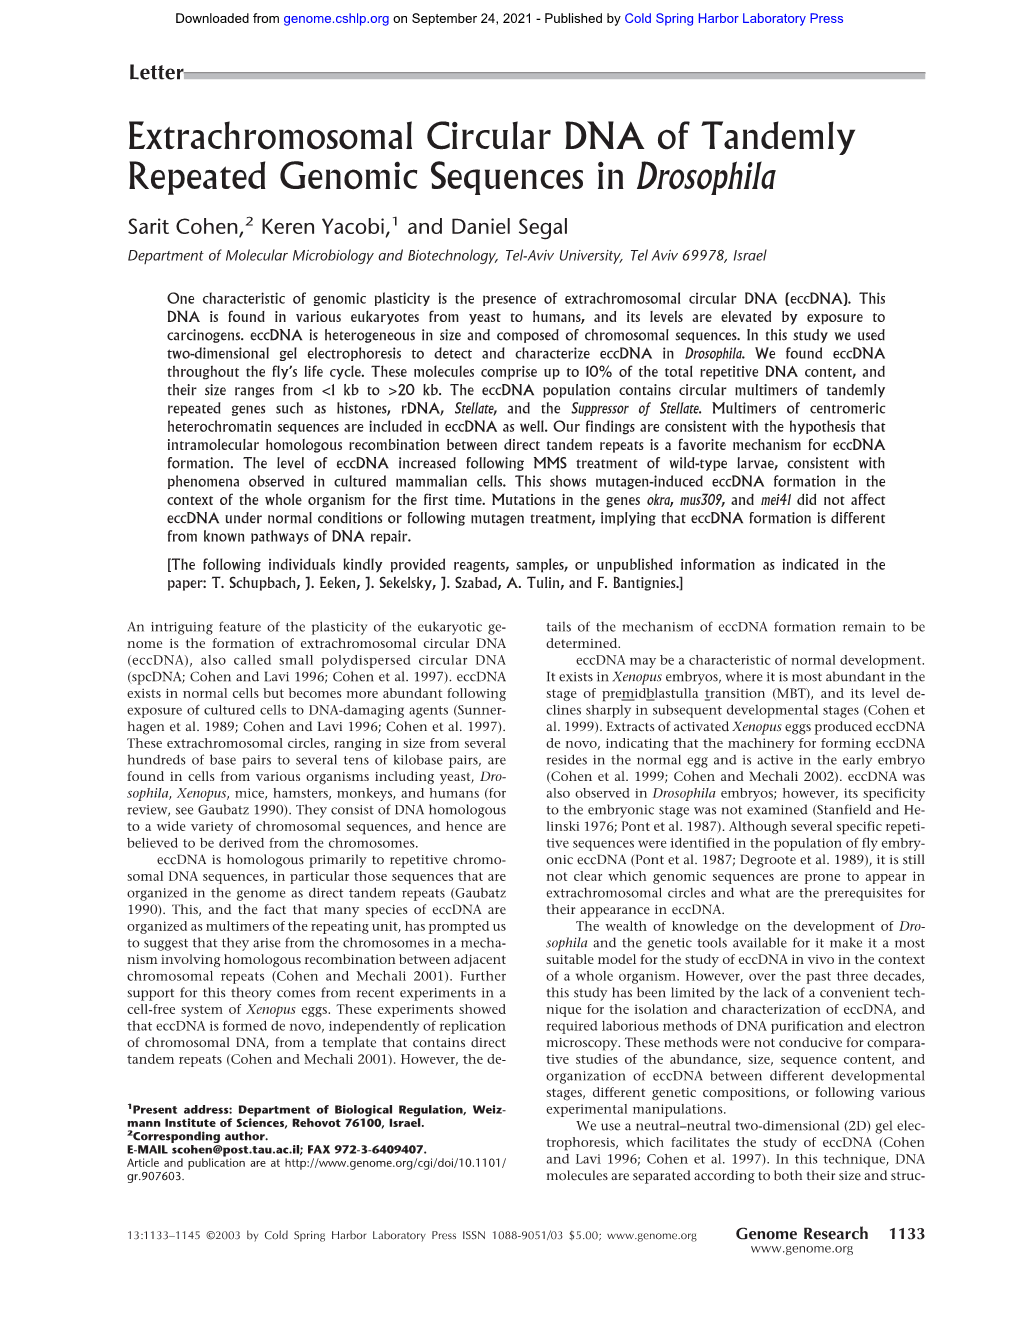 Extrachromosomal Circular DNA of Tandemly Repeated Genomic